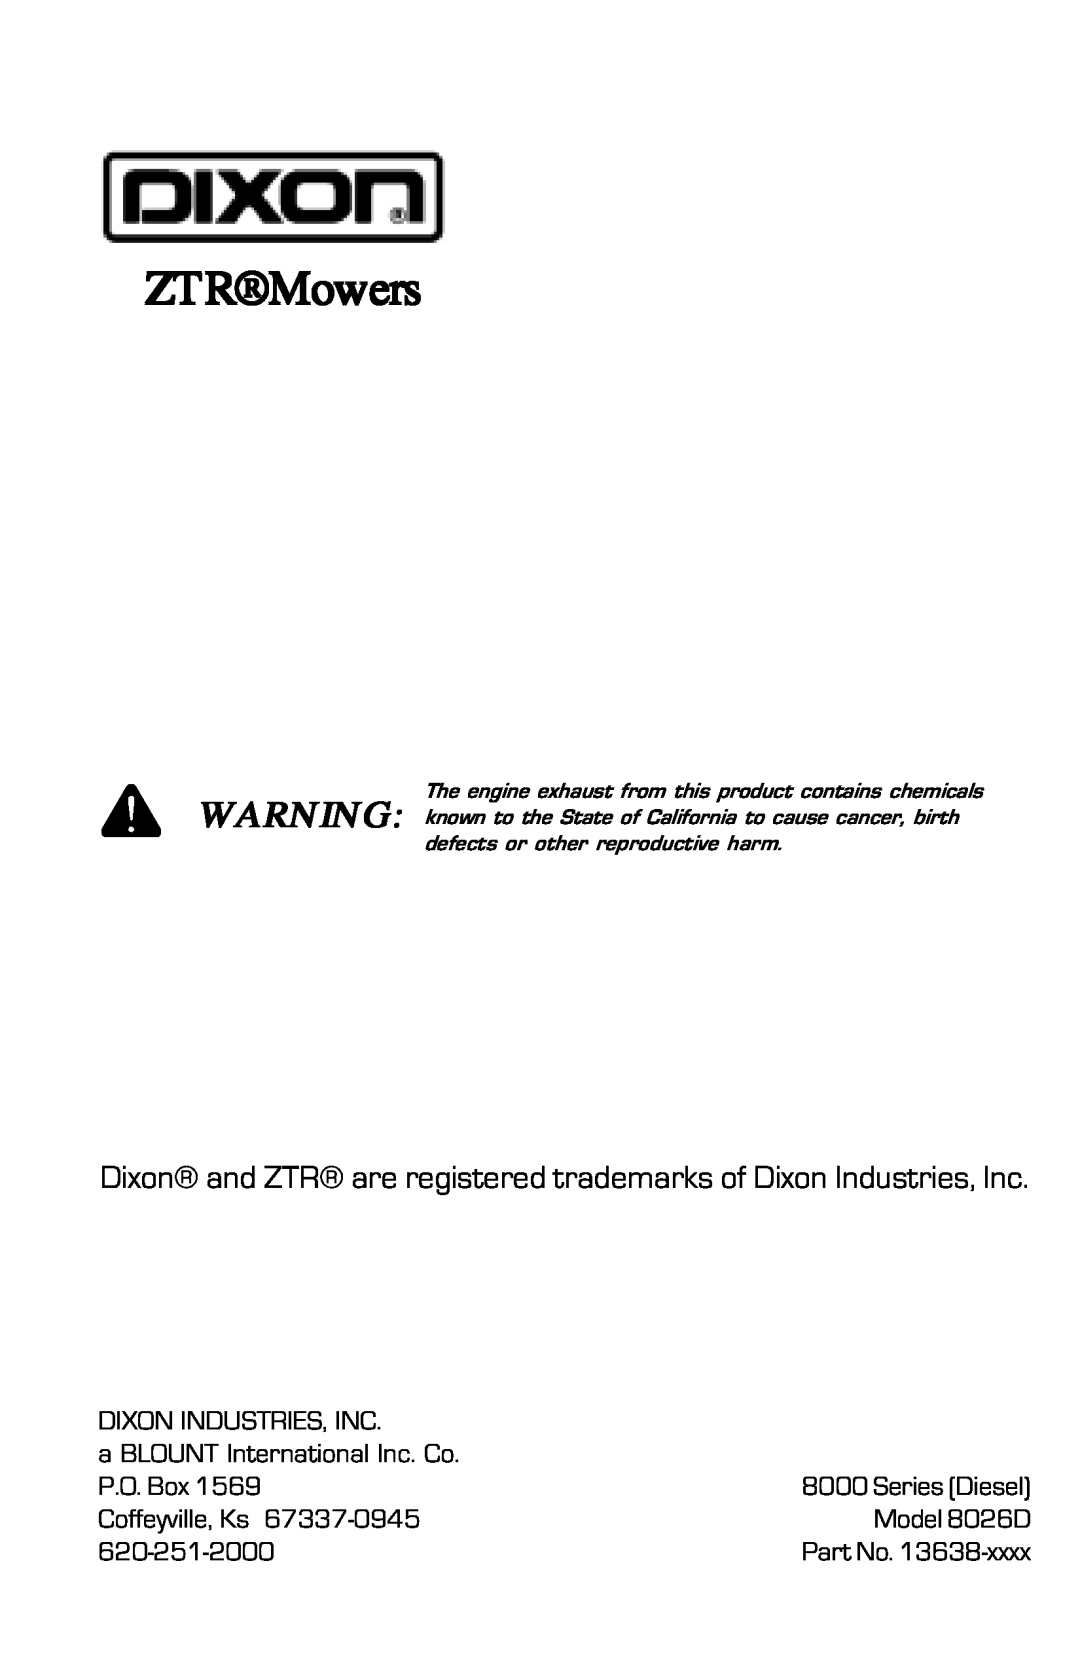 Dixon 8000D manual ZTRMowers, Dixon and ZTR are registered trademarks of Dixon Industries, Inc 